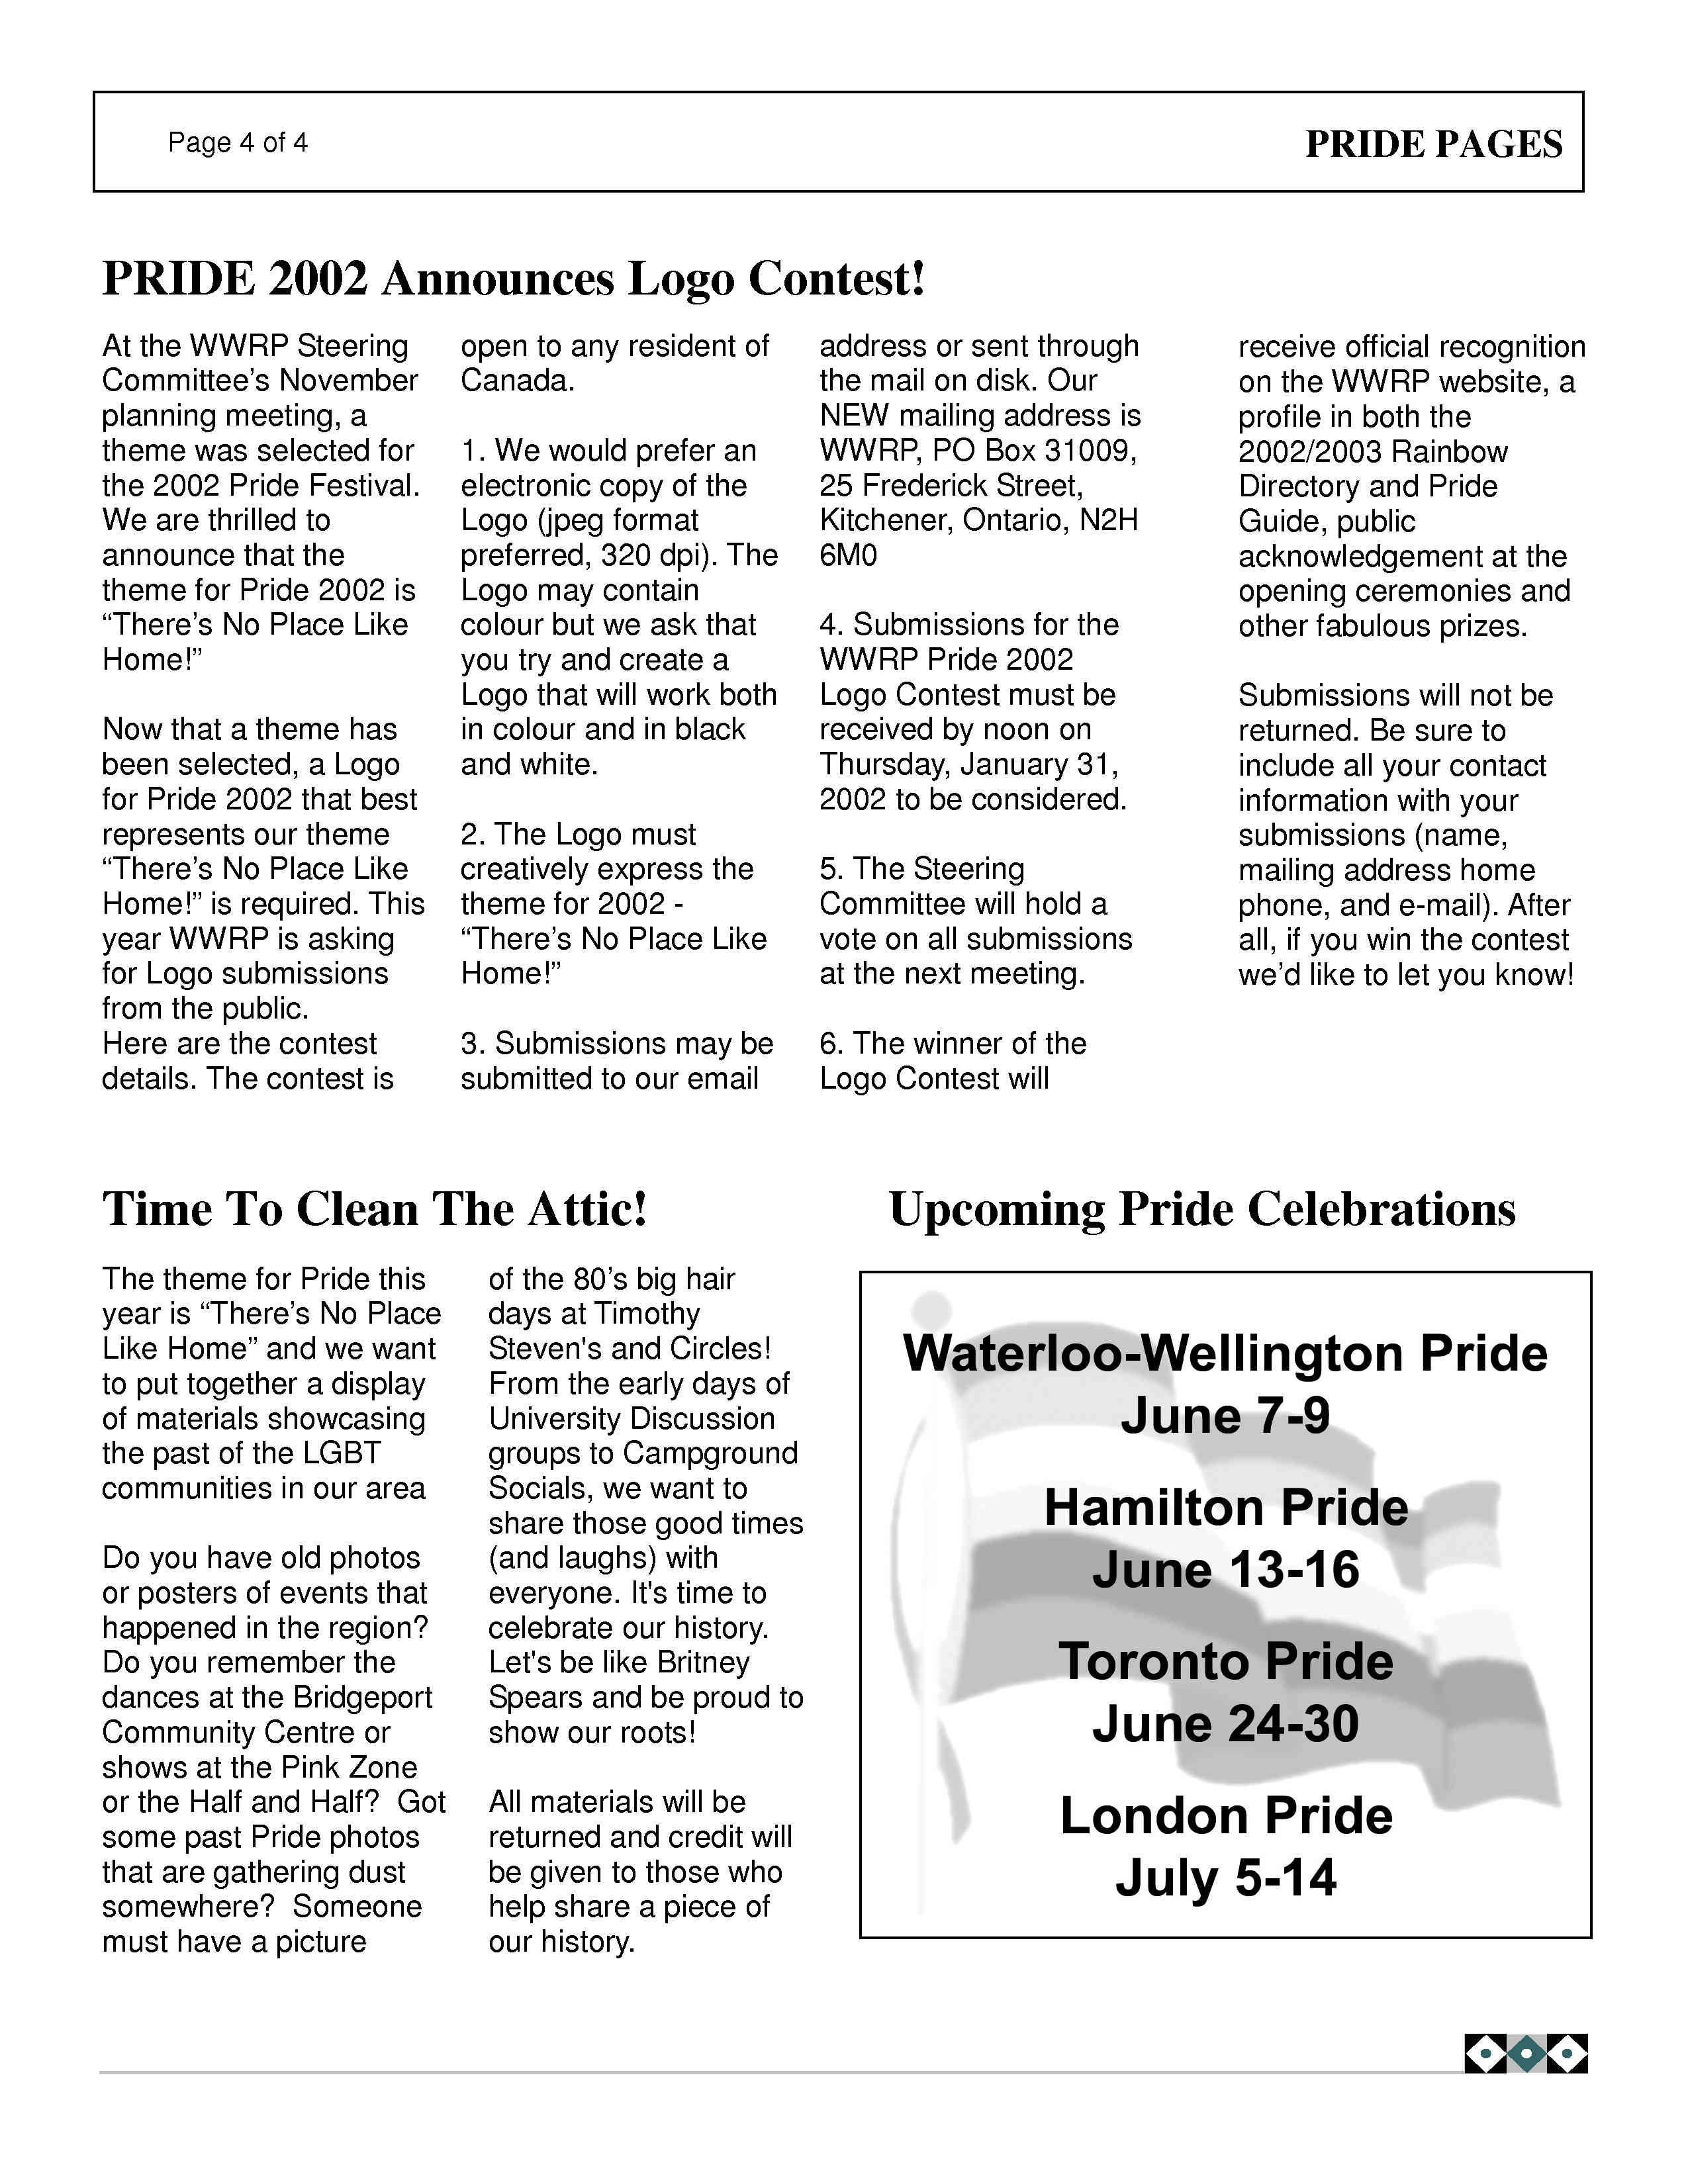 Pride Pages 2002-01 p4